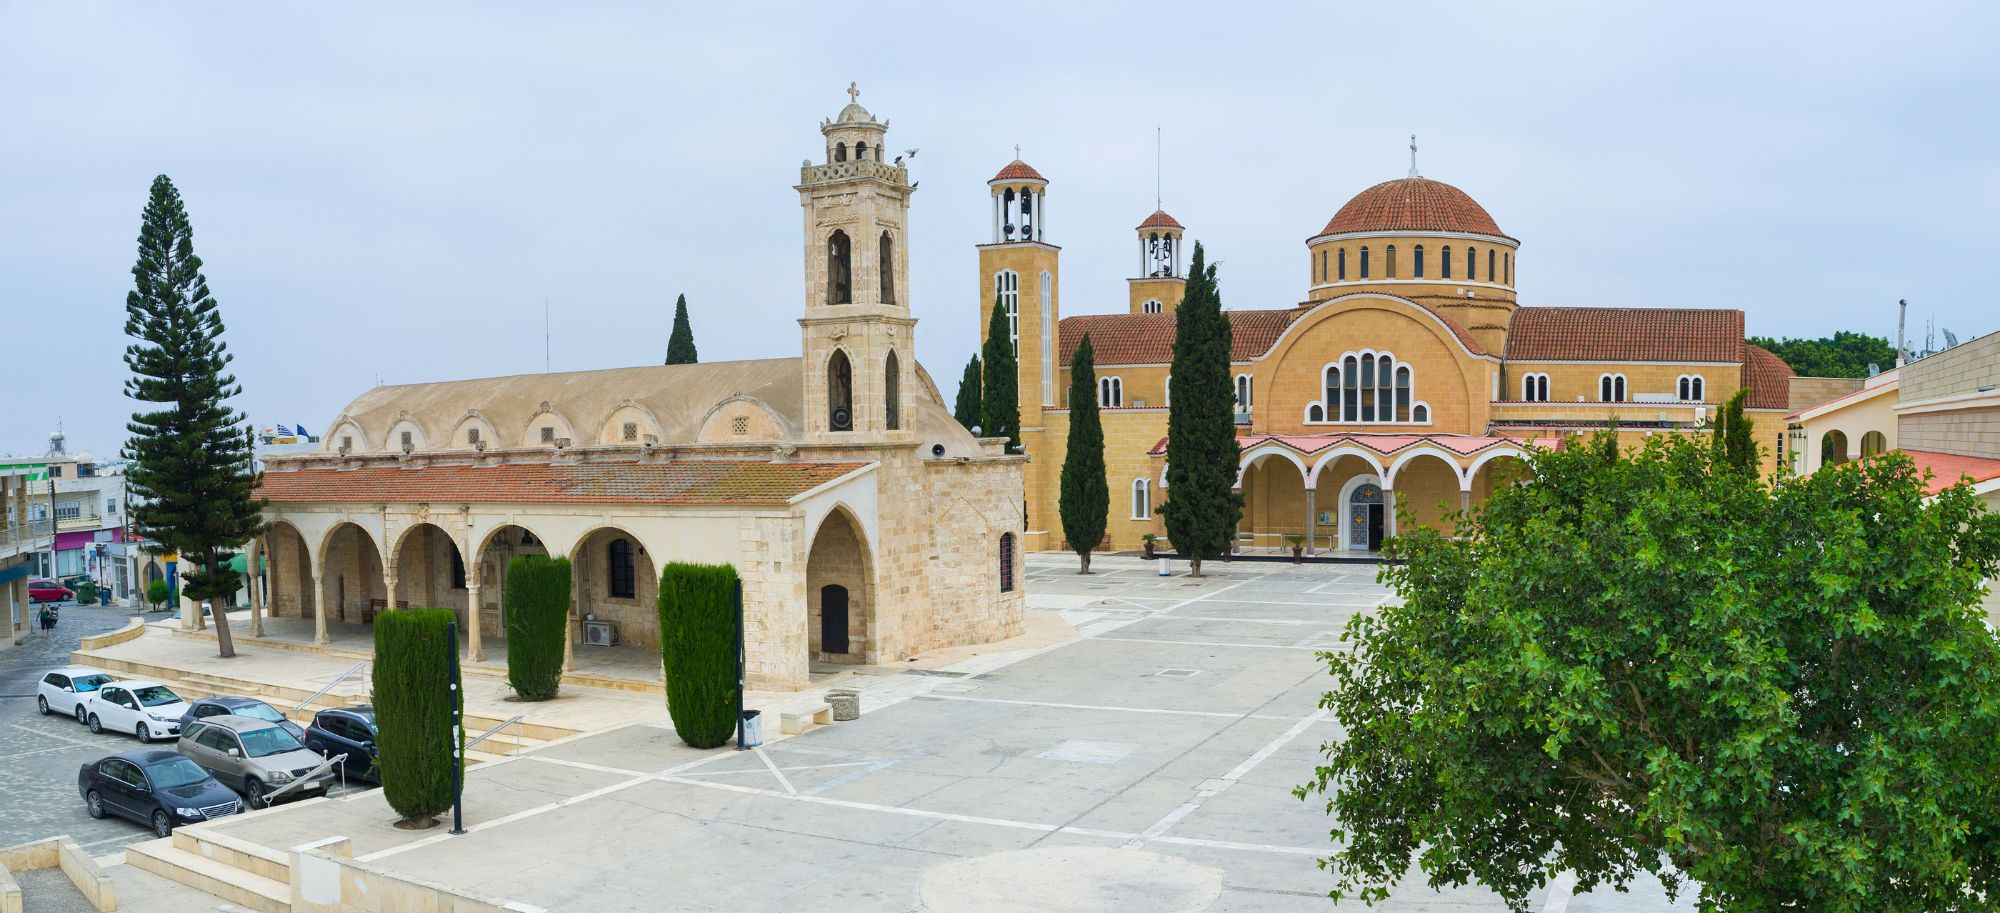 the cathedral squarejpg Τοπικα